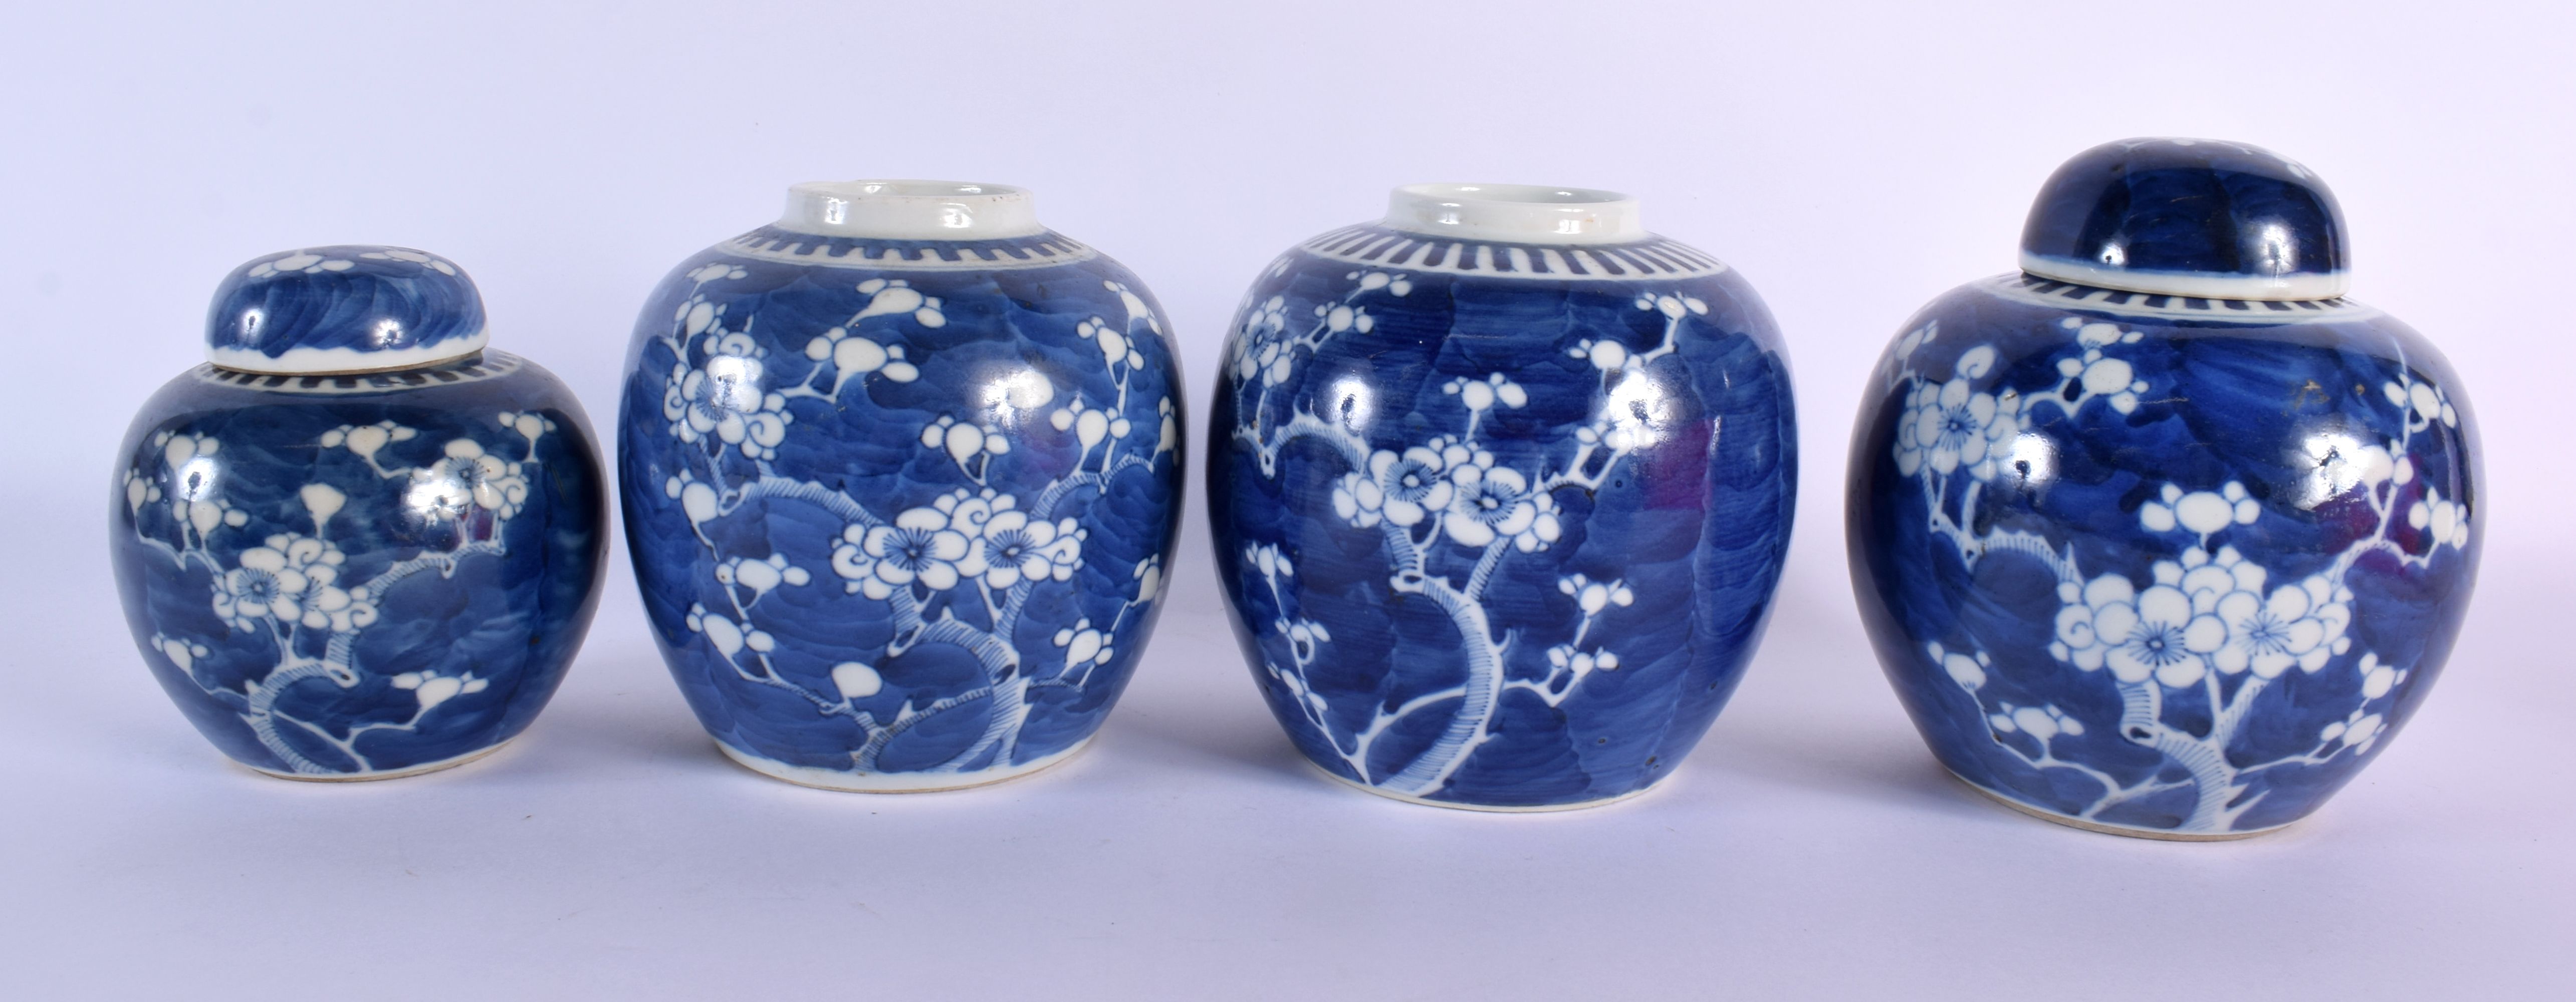 FOUR 19TH CENTURY CHINESE BLUE AND WHITE GINGER JARS Kangxi style. Largest 15 cm x 11 cm. (4)